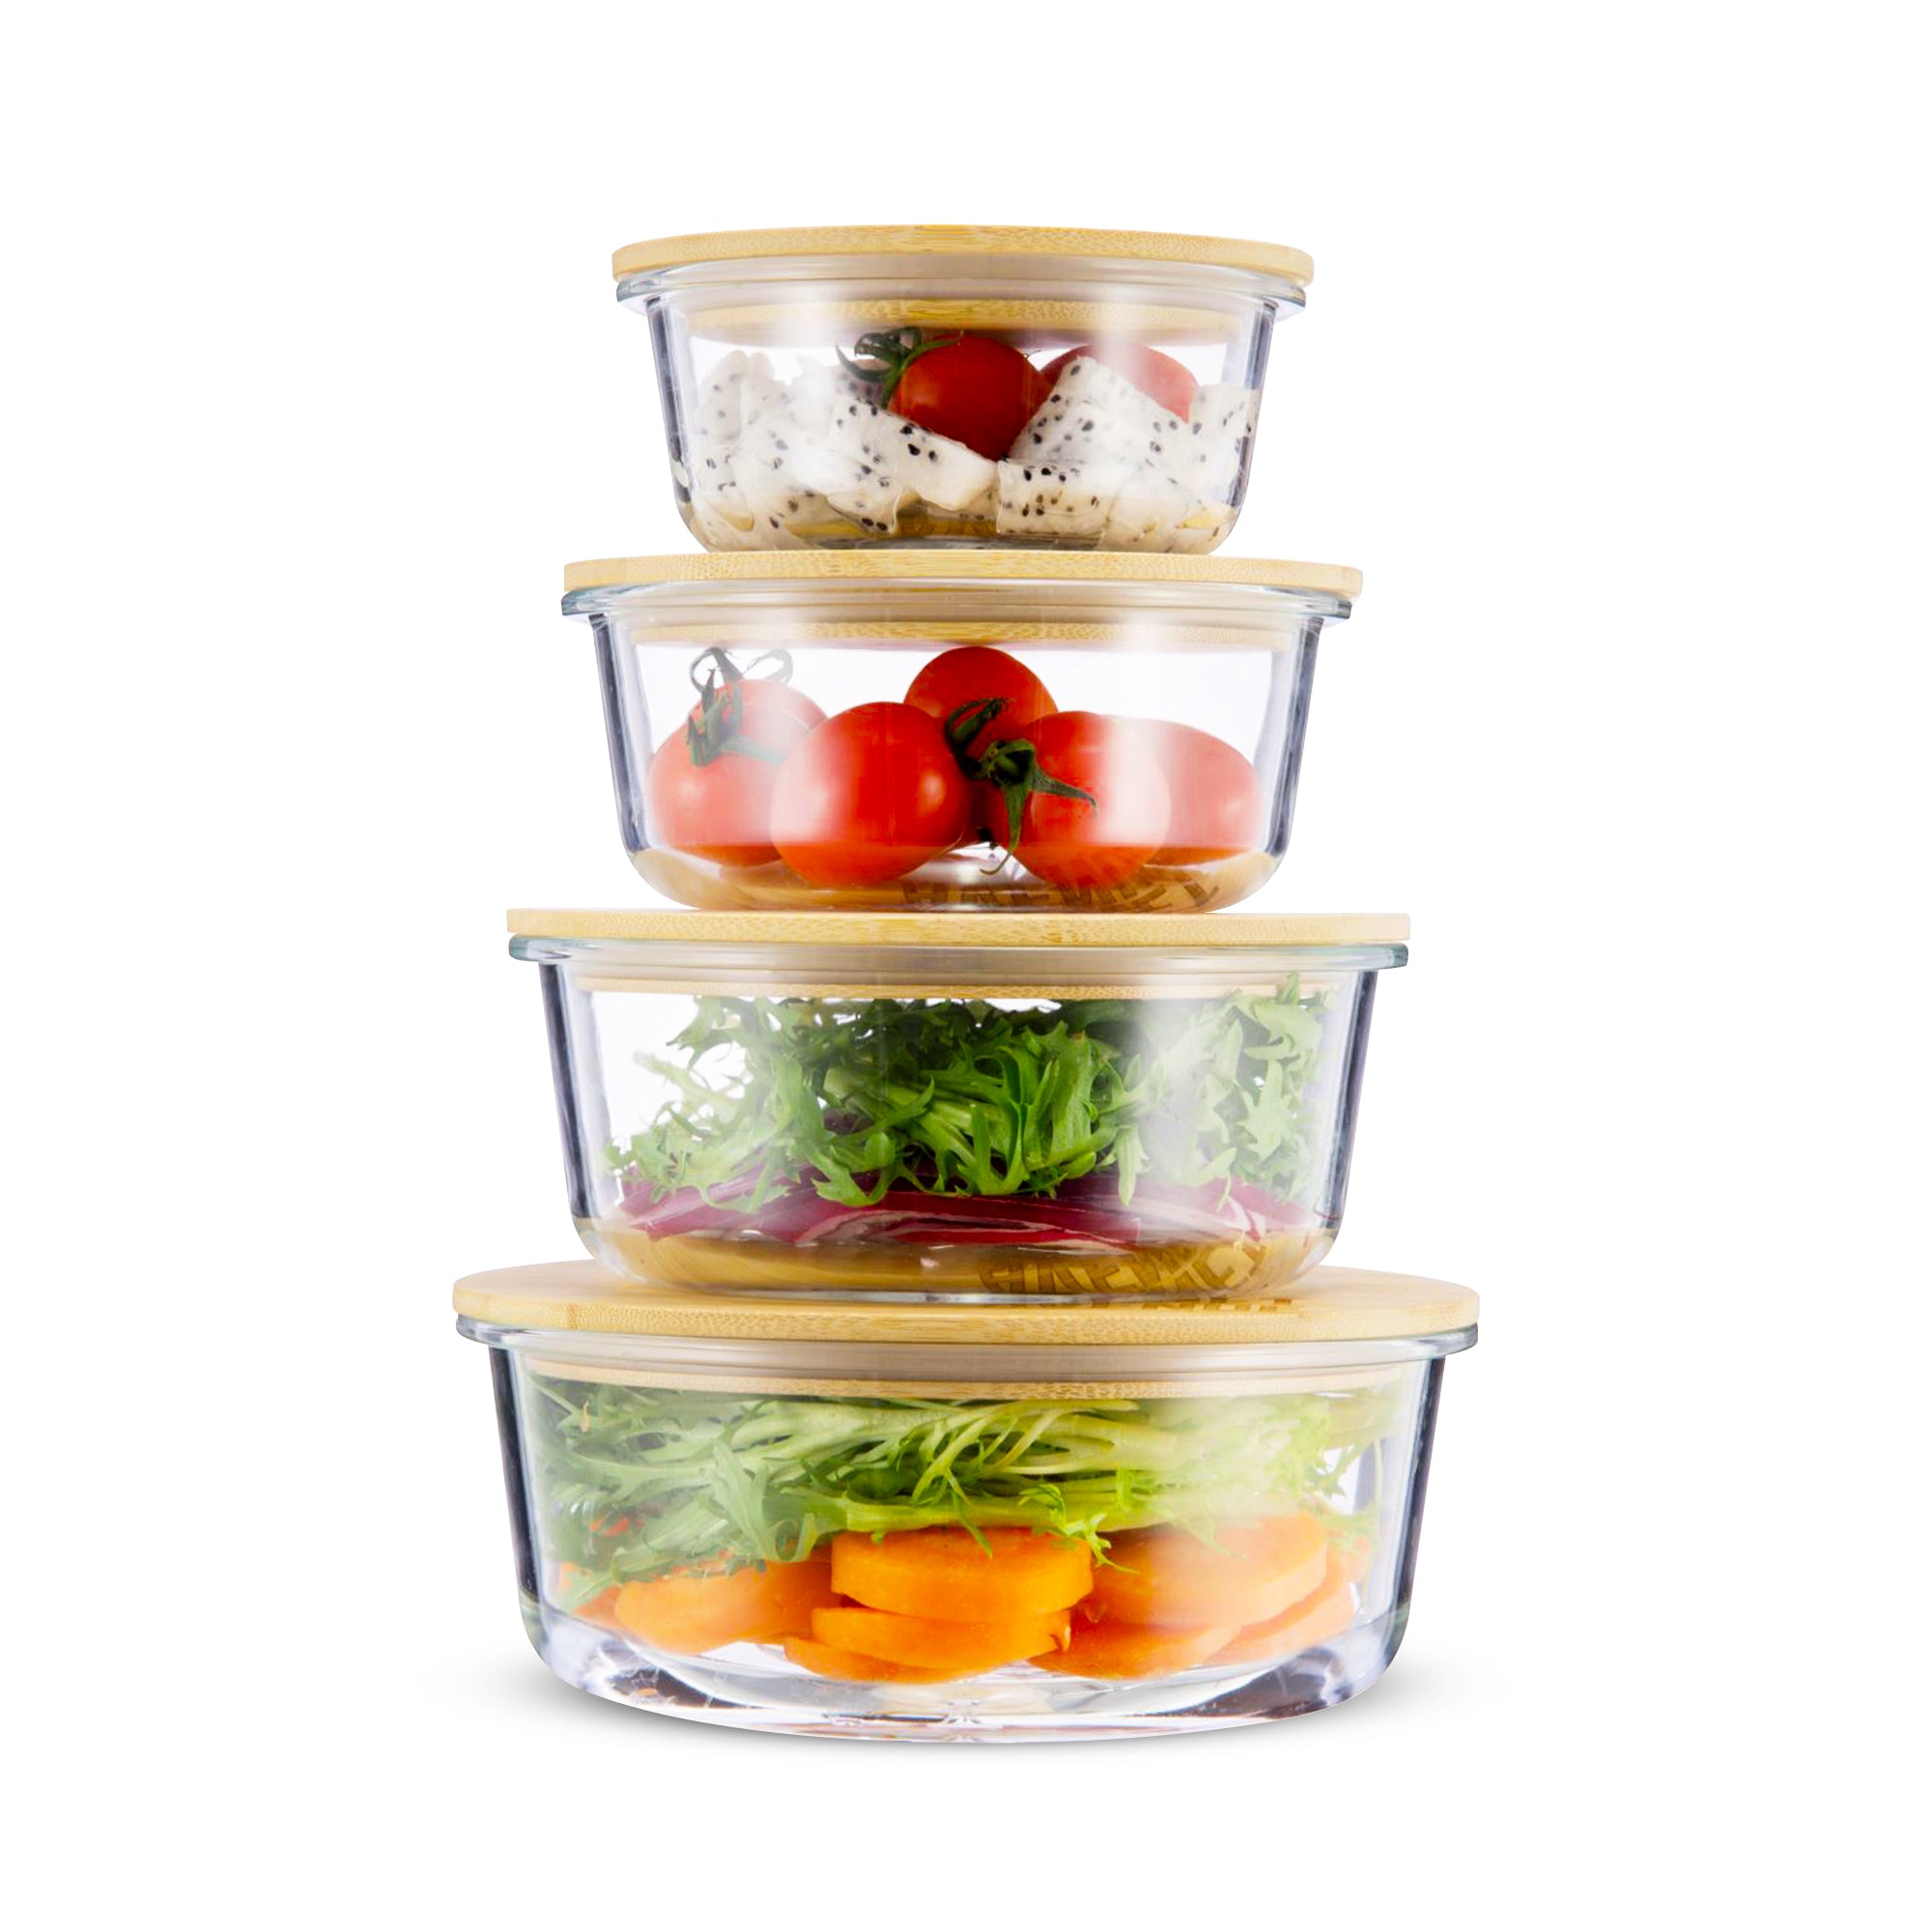 Greener Chef Glass Food Storage Containers with Lids (Bamboo) - 4